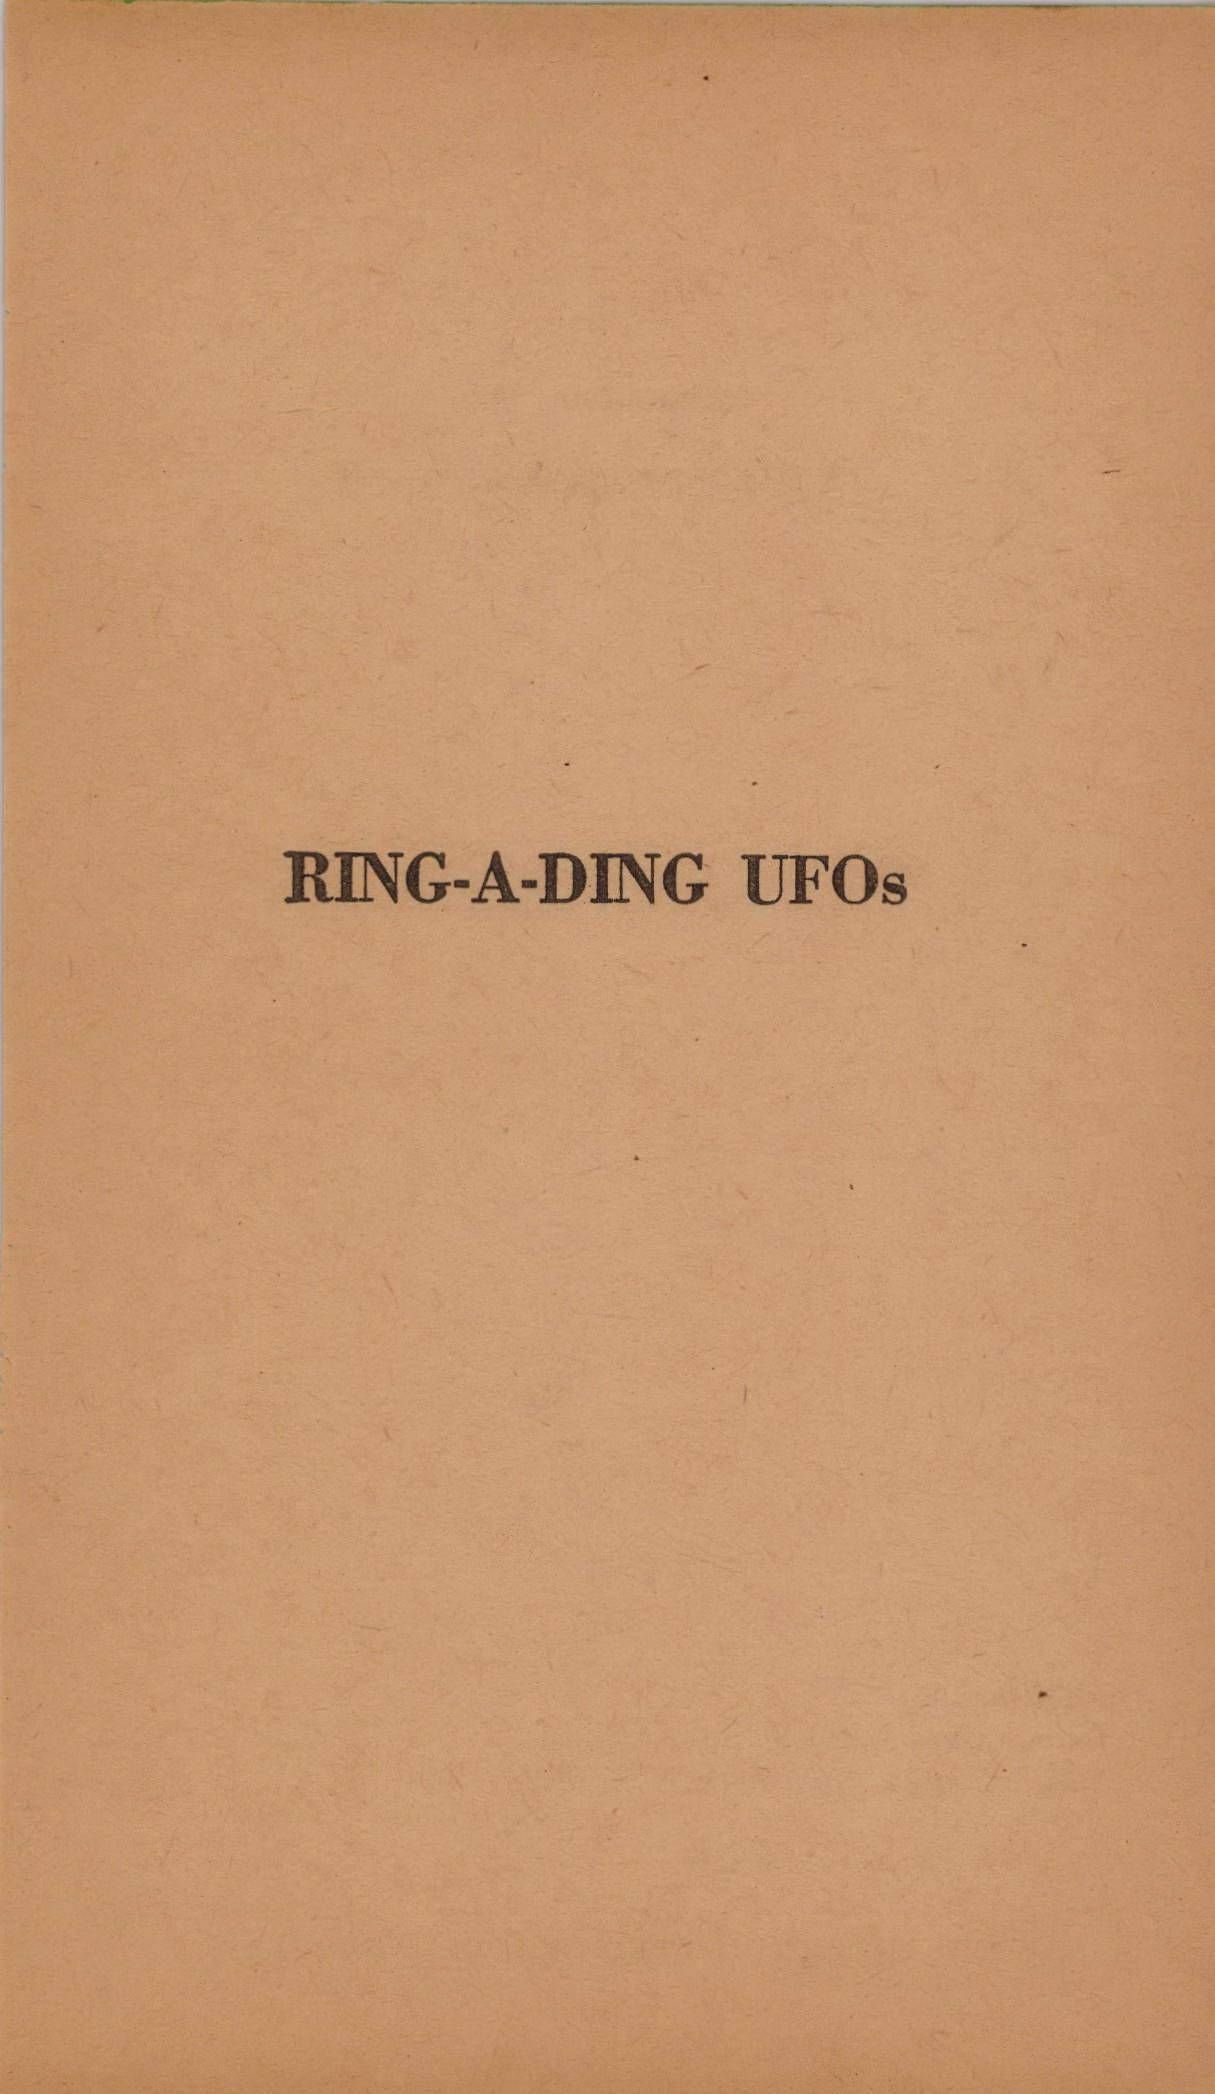 The Miss from SIS Ring-A-Ding UFOs by Bob Tralins page 006.jpg